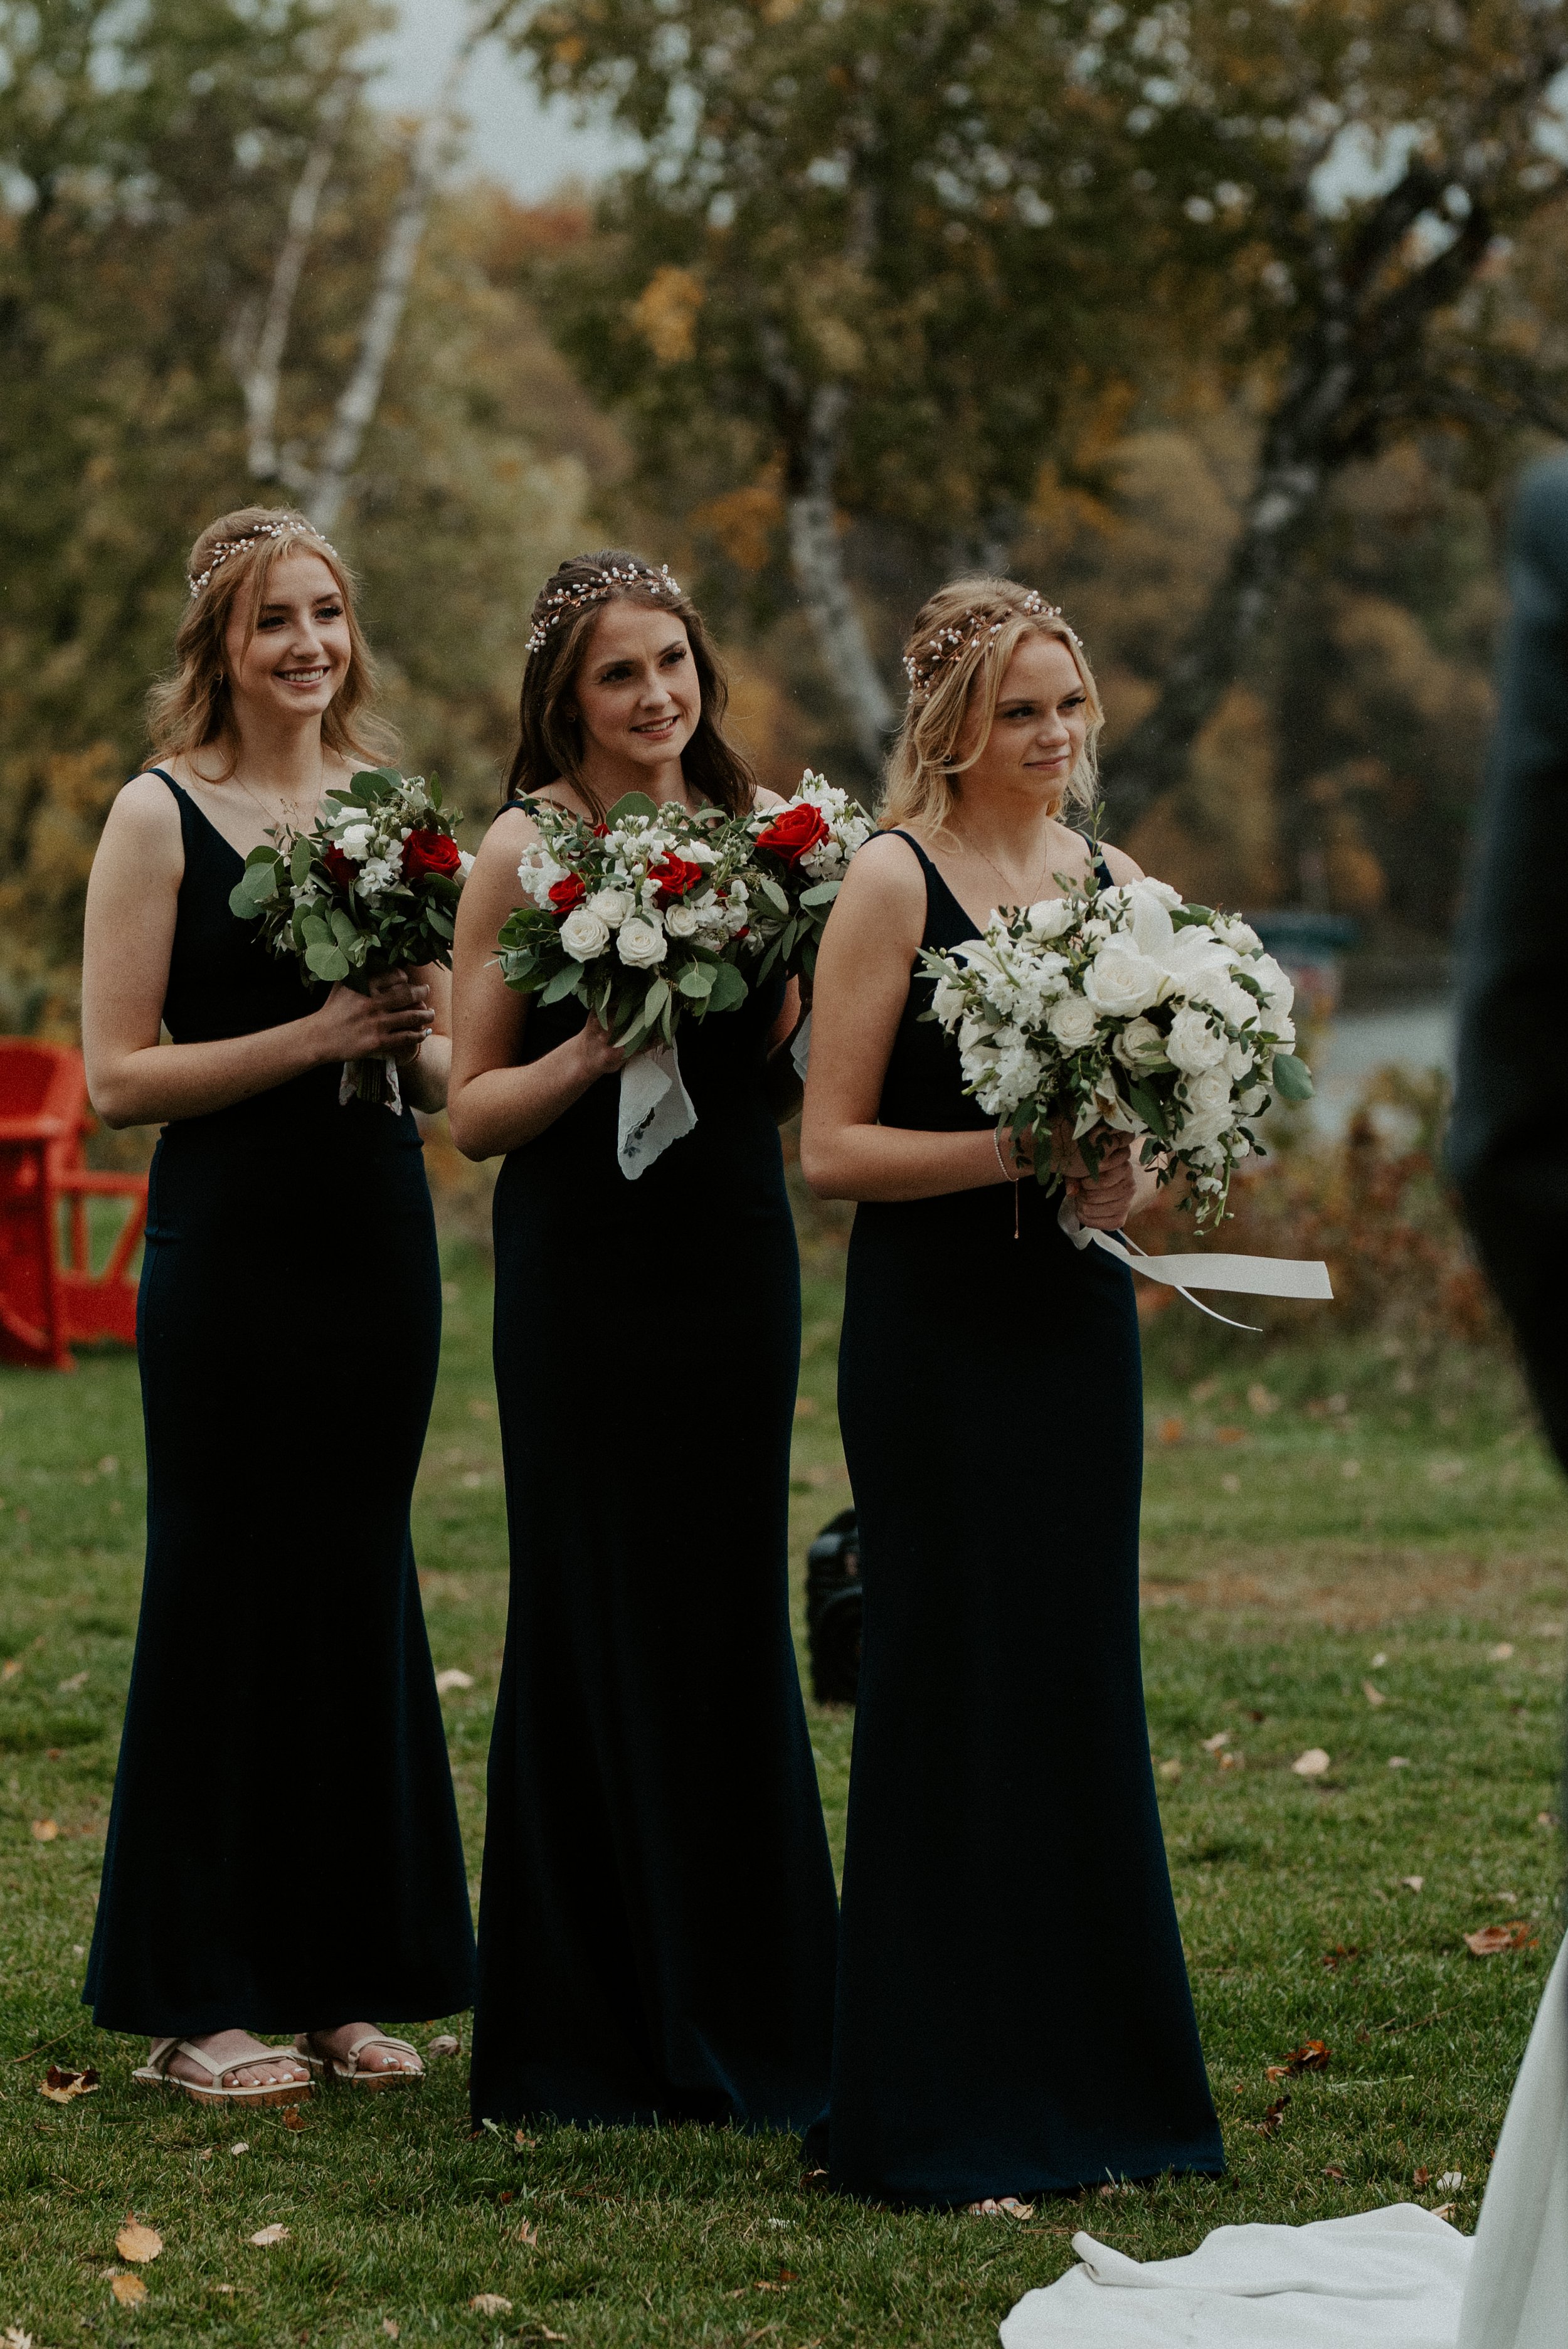 bridesmaids wearing matching black dresses and holding classic bouquets